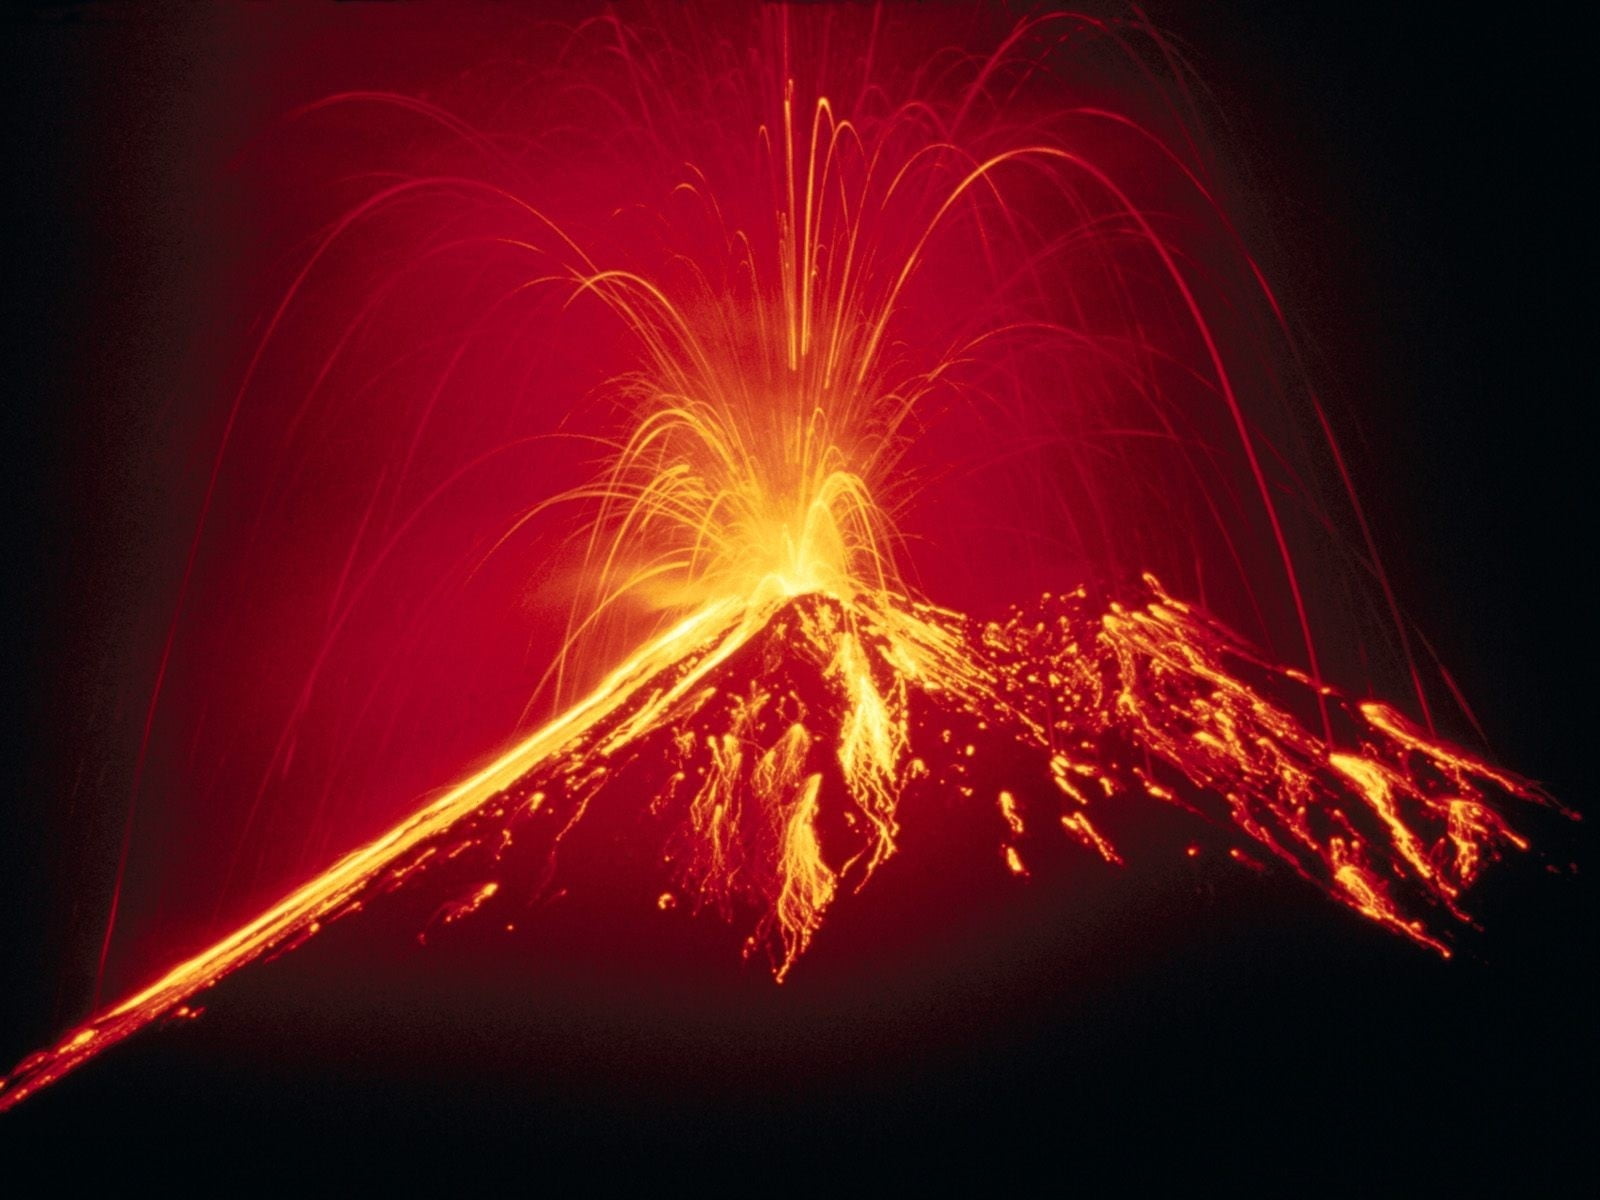 erupting volcano during night time